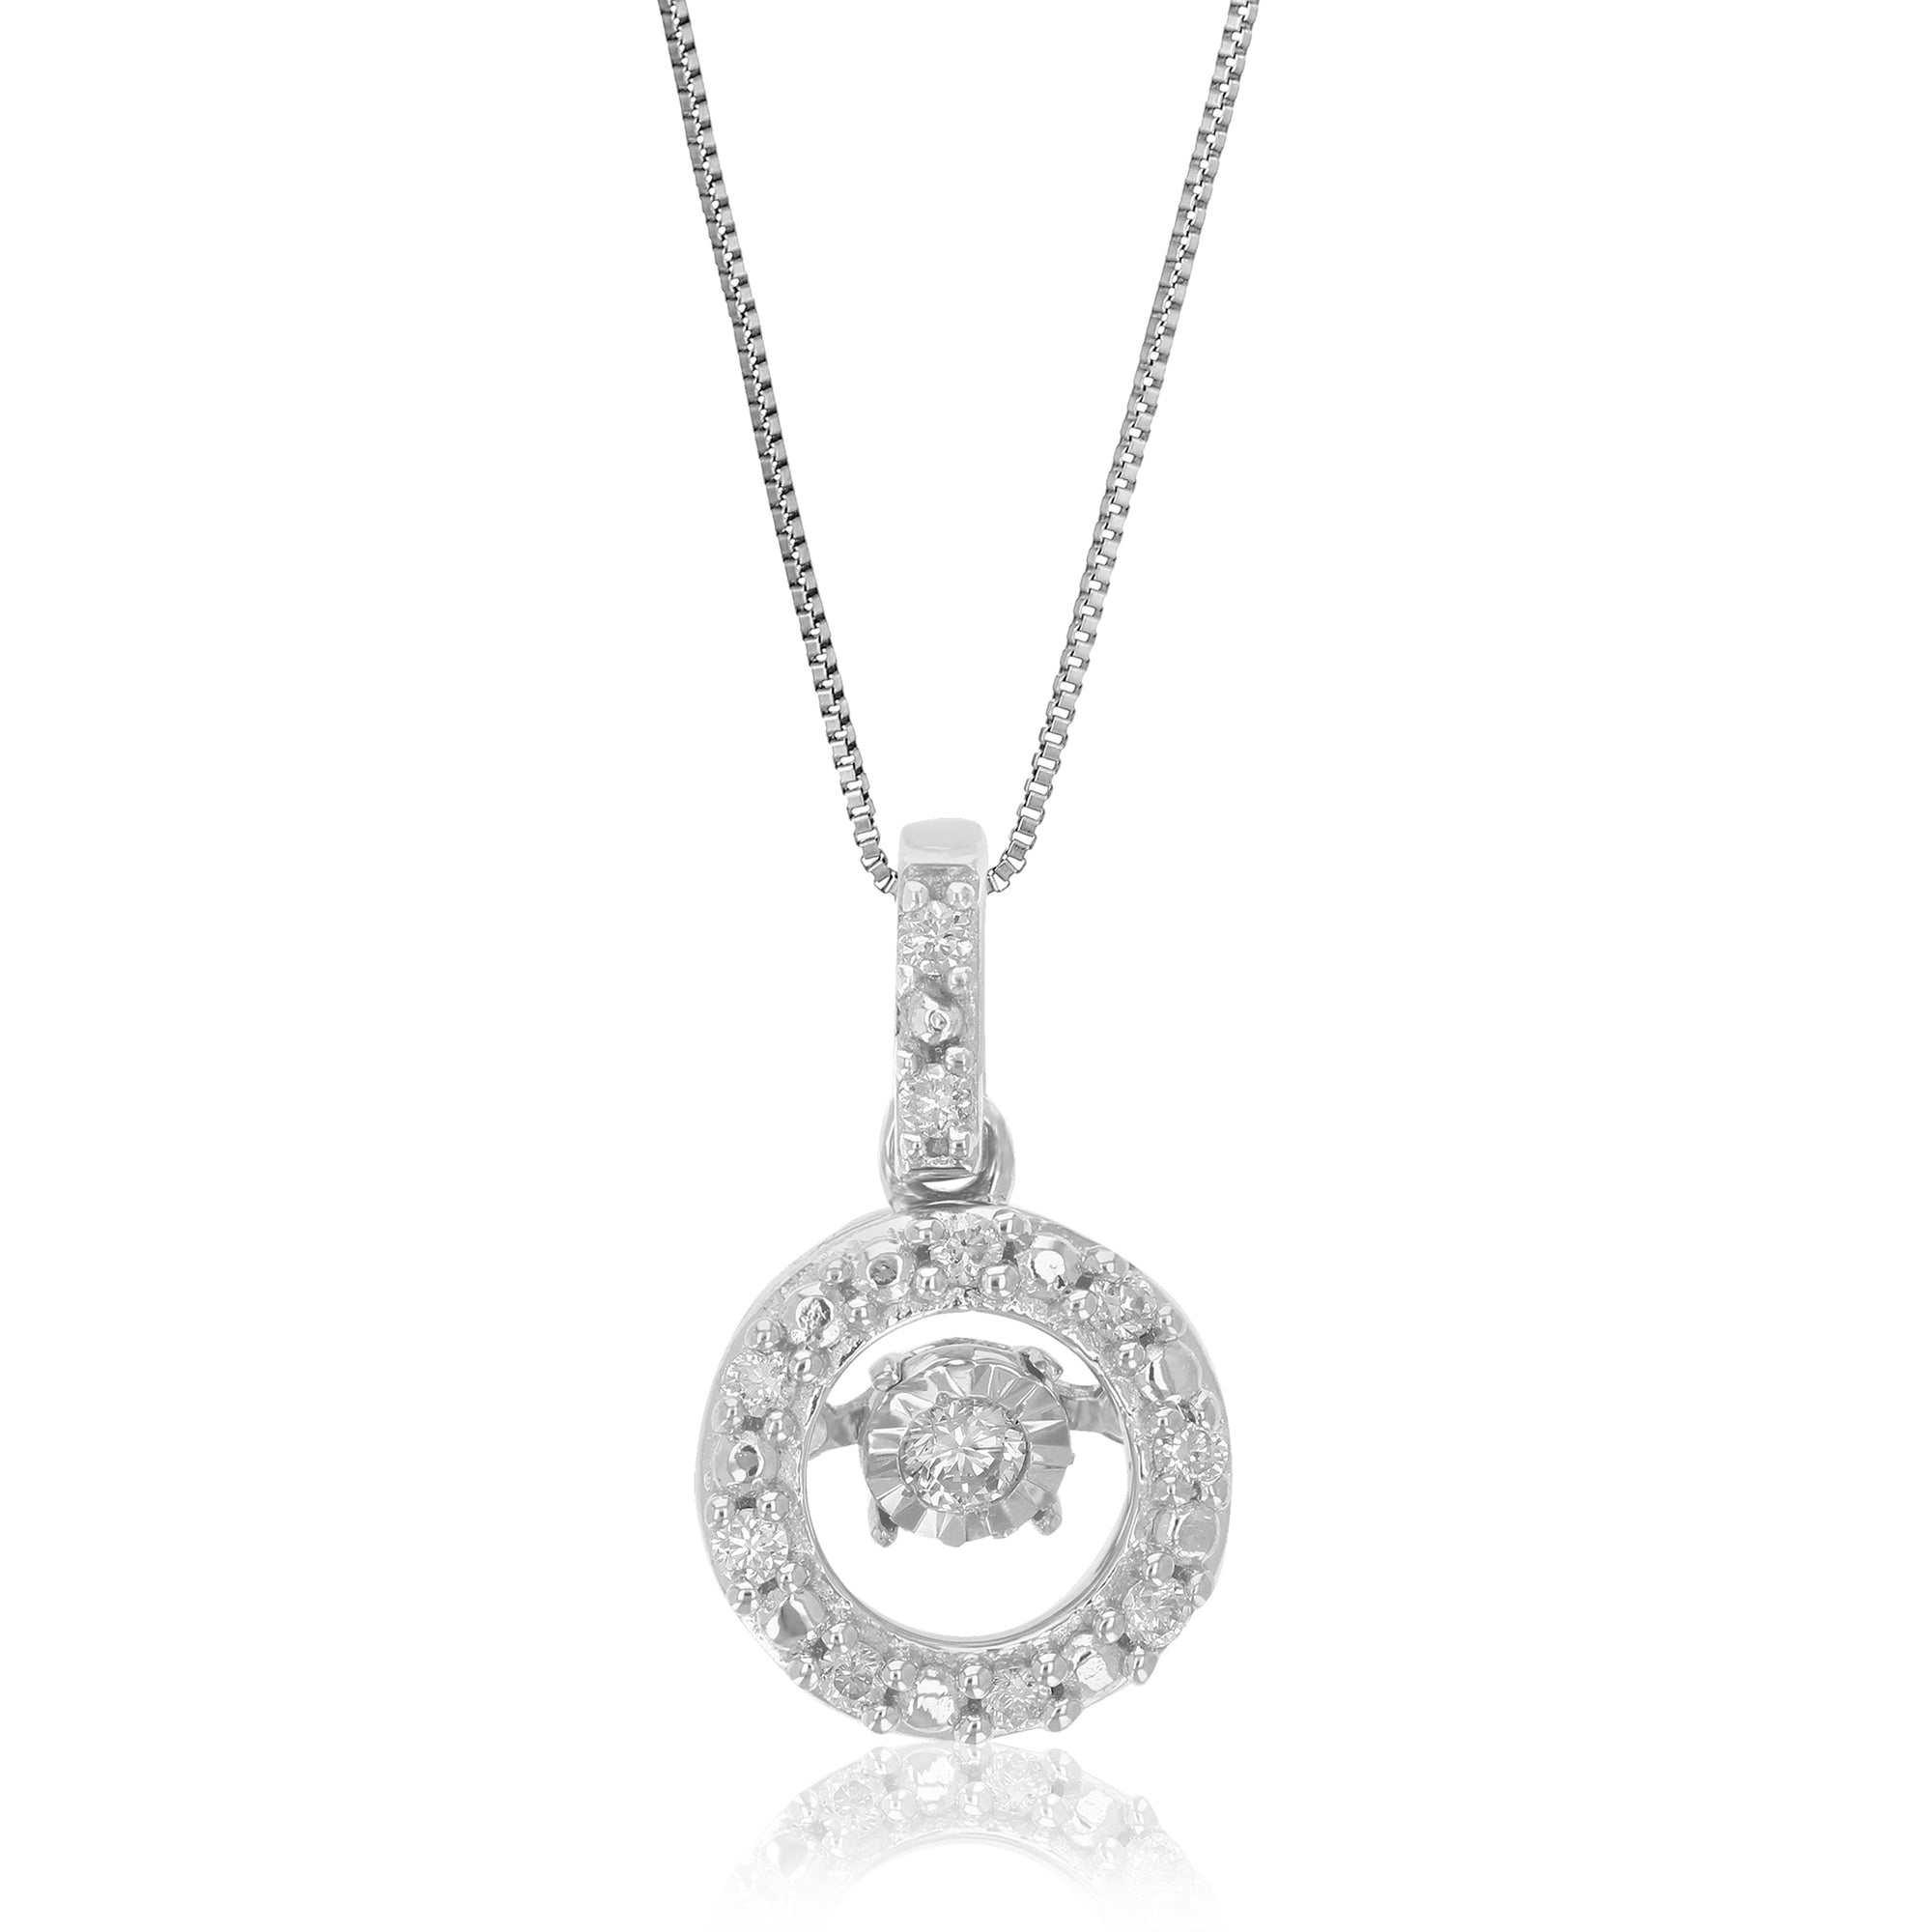 1/12 cttw Diamond Pendant Necklace for Women, Lab Grown Diamond Round Pendant Necklace in .925 Sterling Silver with Chain, Size 1/2 Inch